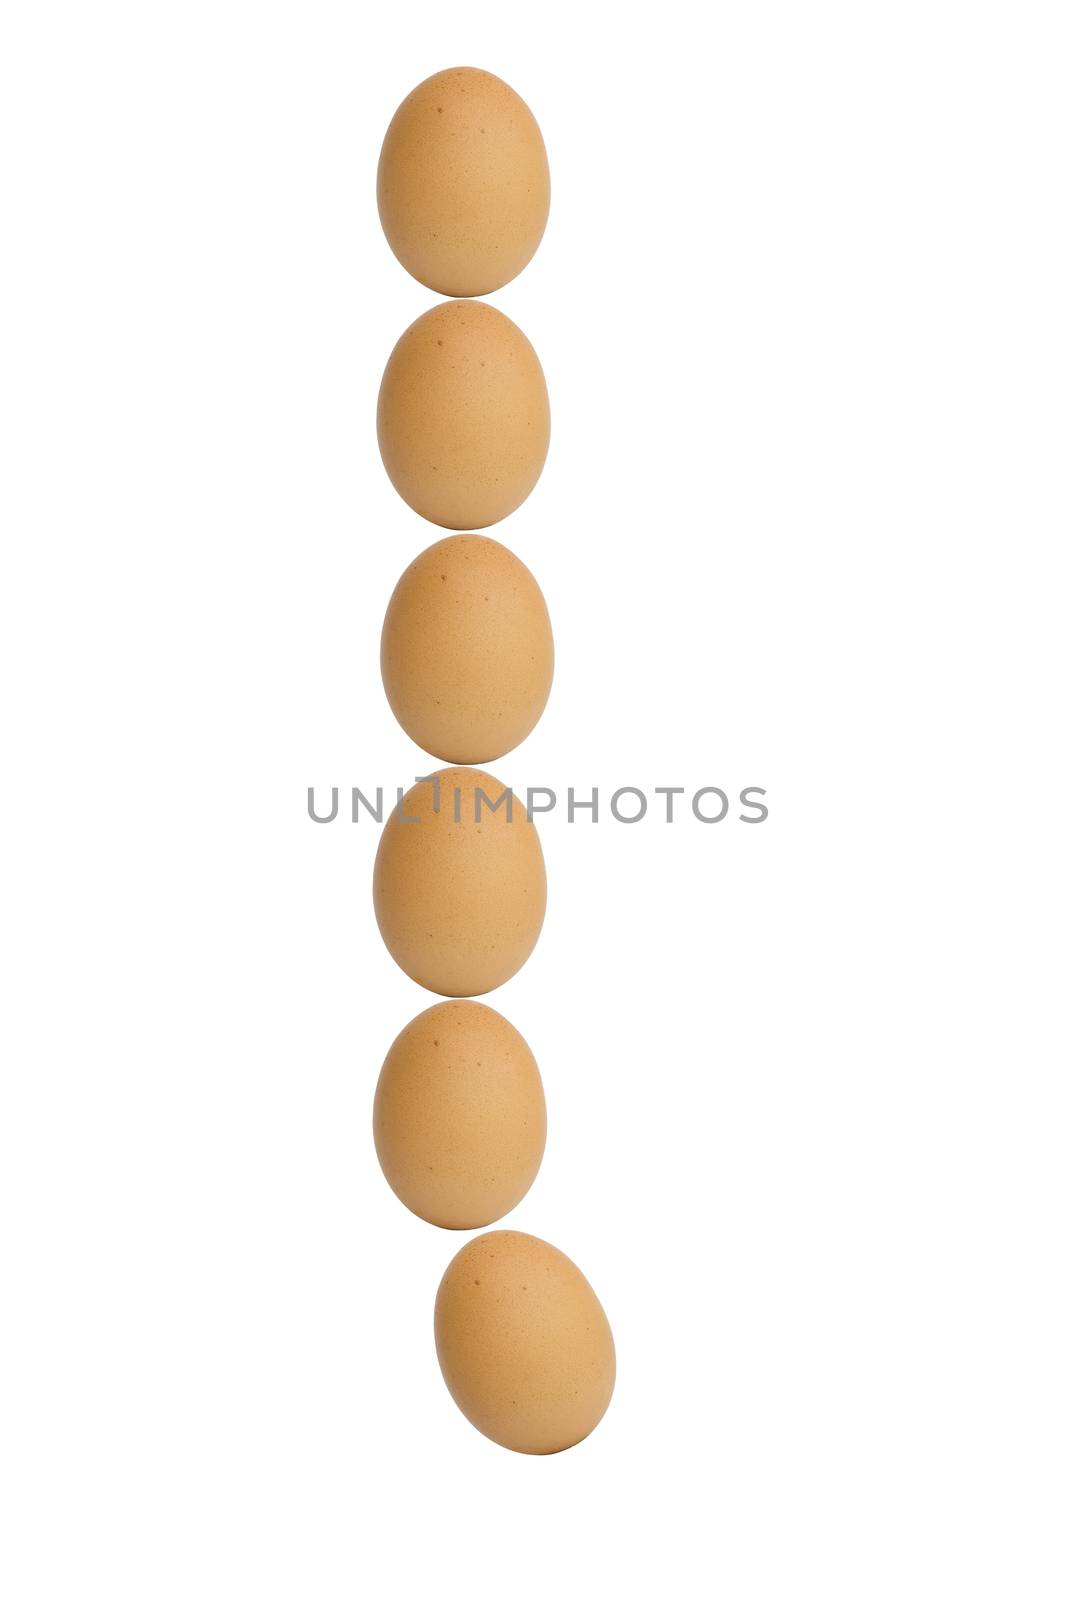 Alphabets  A to Z from brown eggs alphabet isolated on white background, l